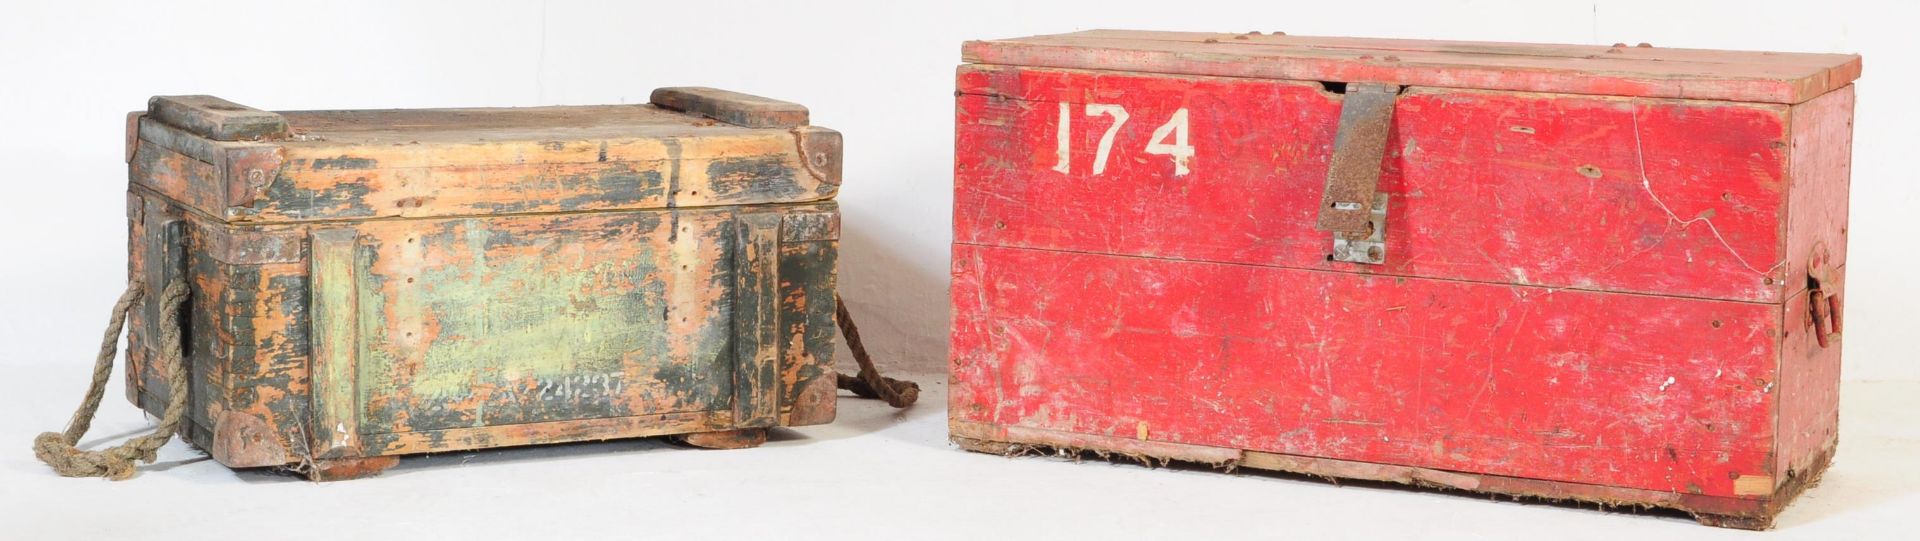 TWO VINTAGE 20TH CENTURY AMMUNITION CRATE BOXES